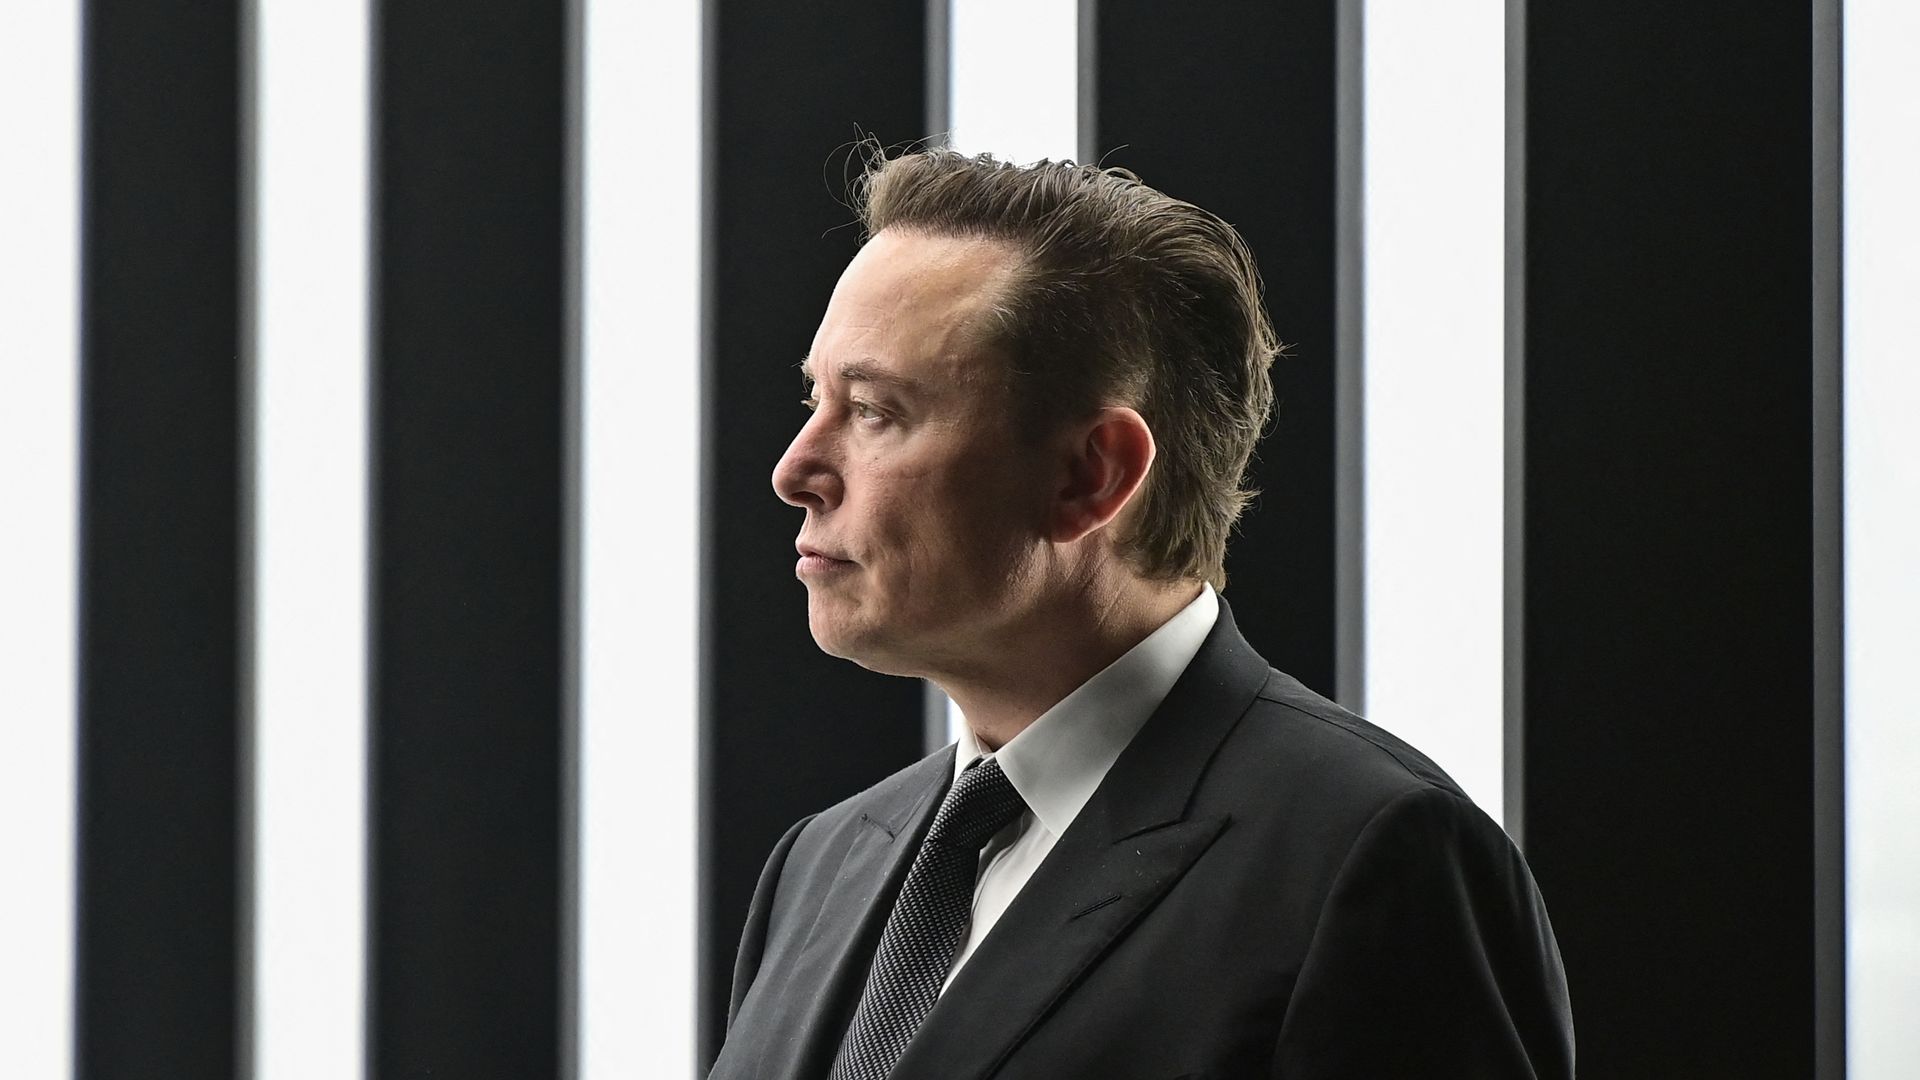 Tesla CEO Elon Musk is pictured as he attends the start of the production at Tesla's "Gigafactory" on March 22, 2022 in Gruenheide, southeast of Berli